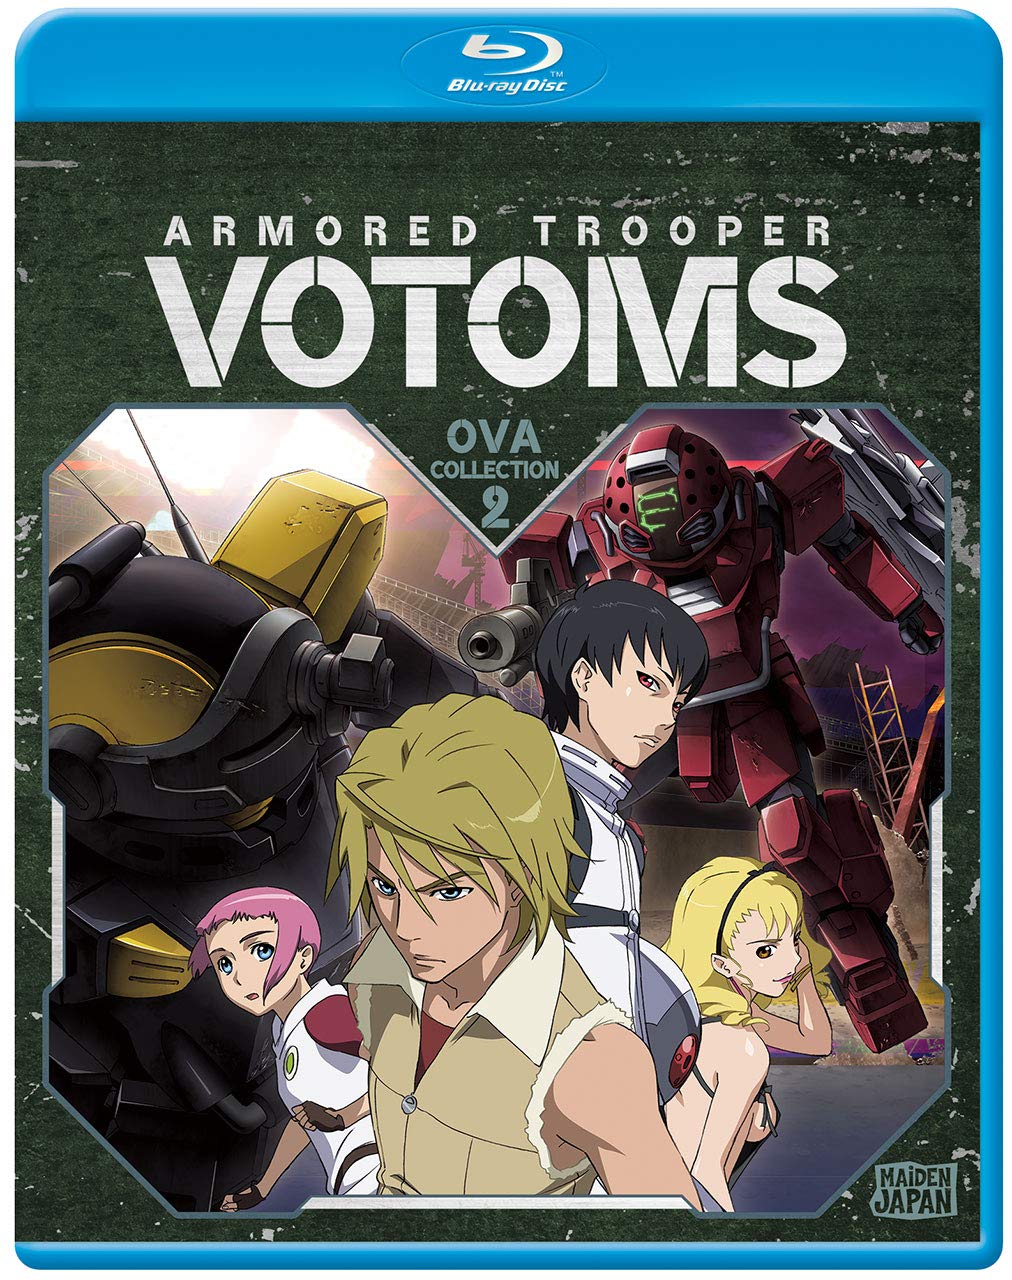 Armored Trooper Votoms OVA Collection 2